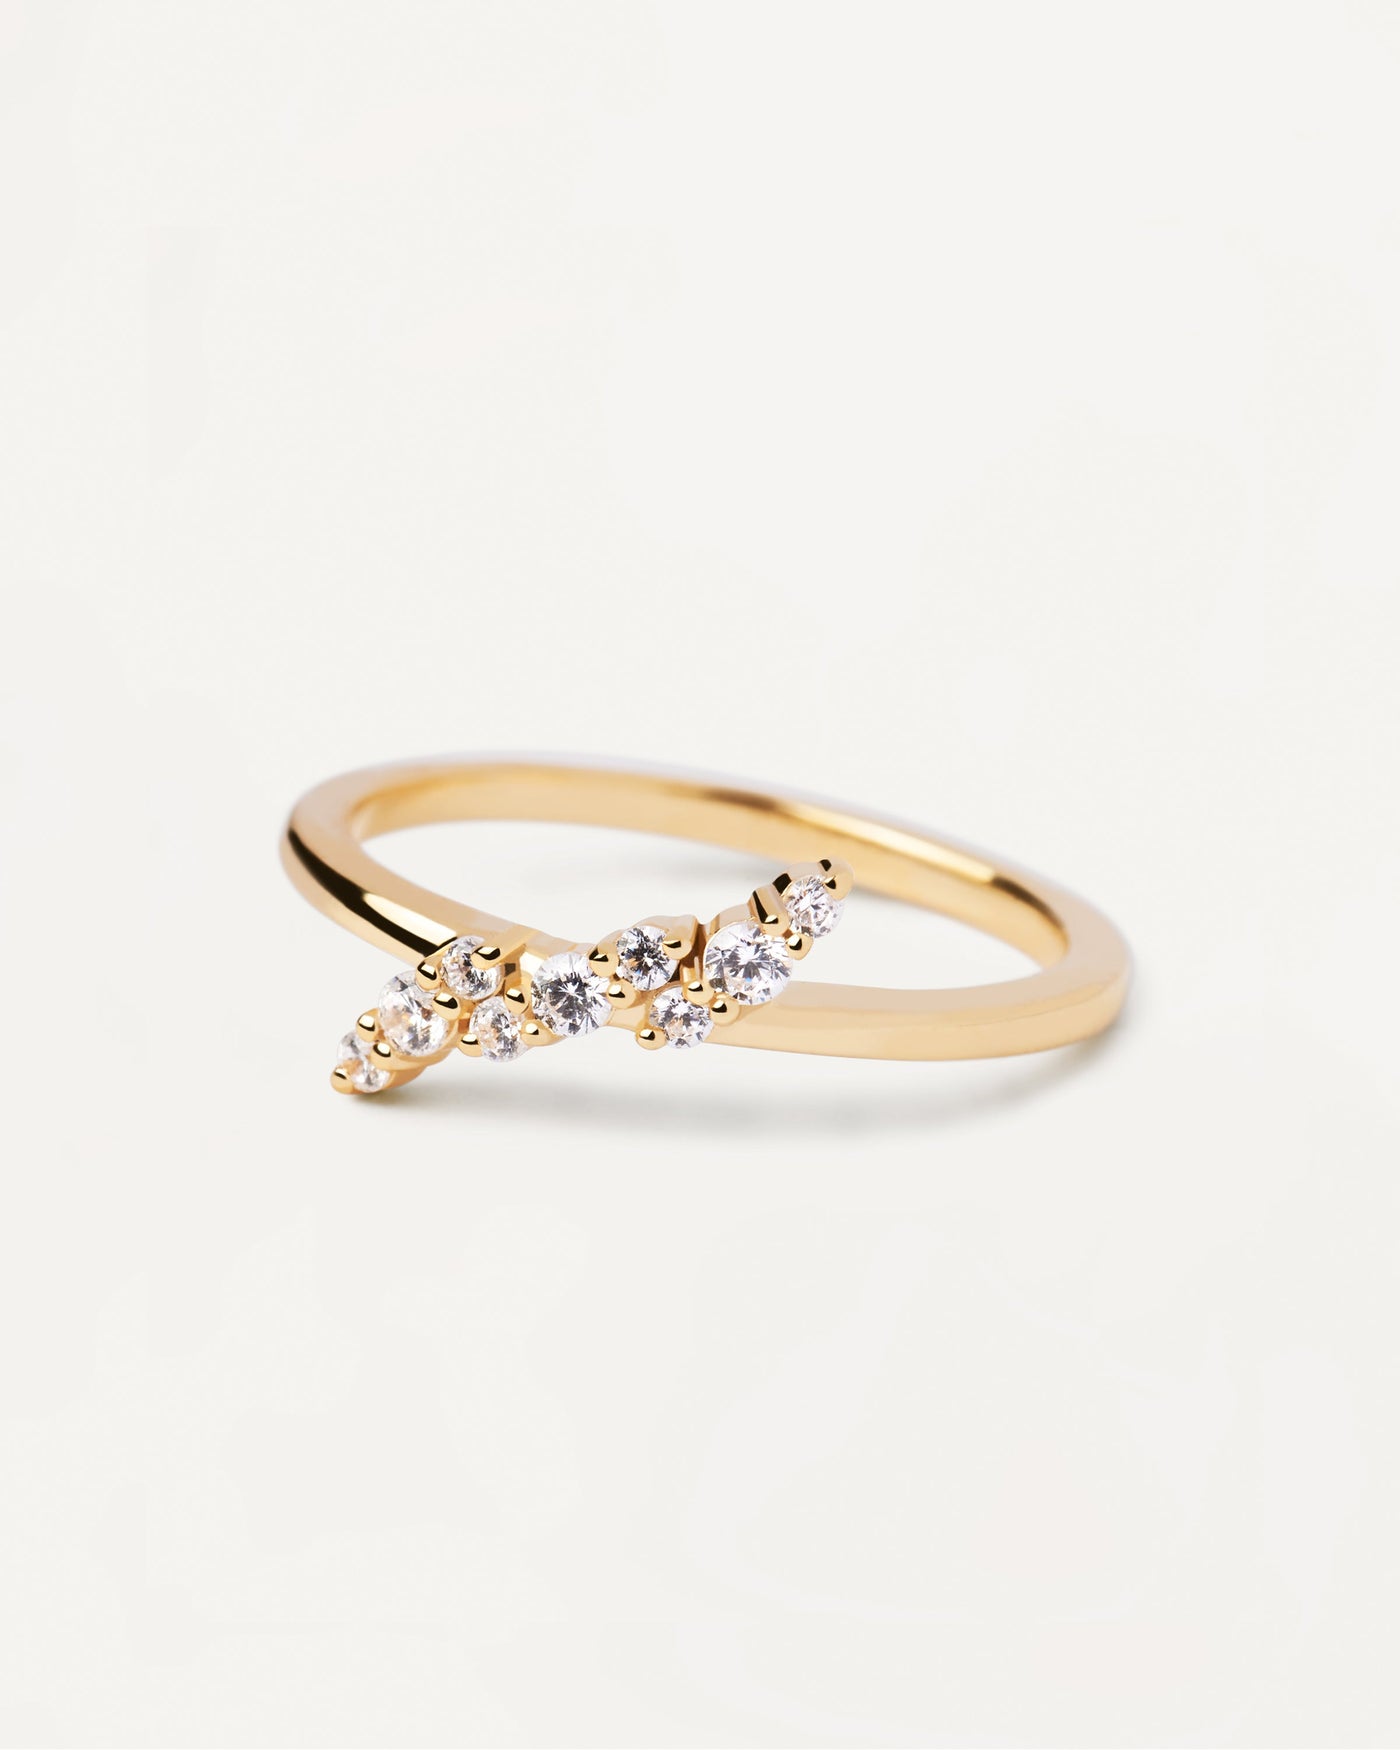 2023 Selection | Natura Ring. Basic gold-plated silver ring with small white crystals. Get the latest arrival from PDPAOLA. Place your order safely and get this Best Seller. Free Shipping.